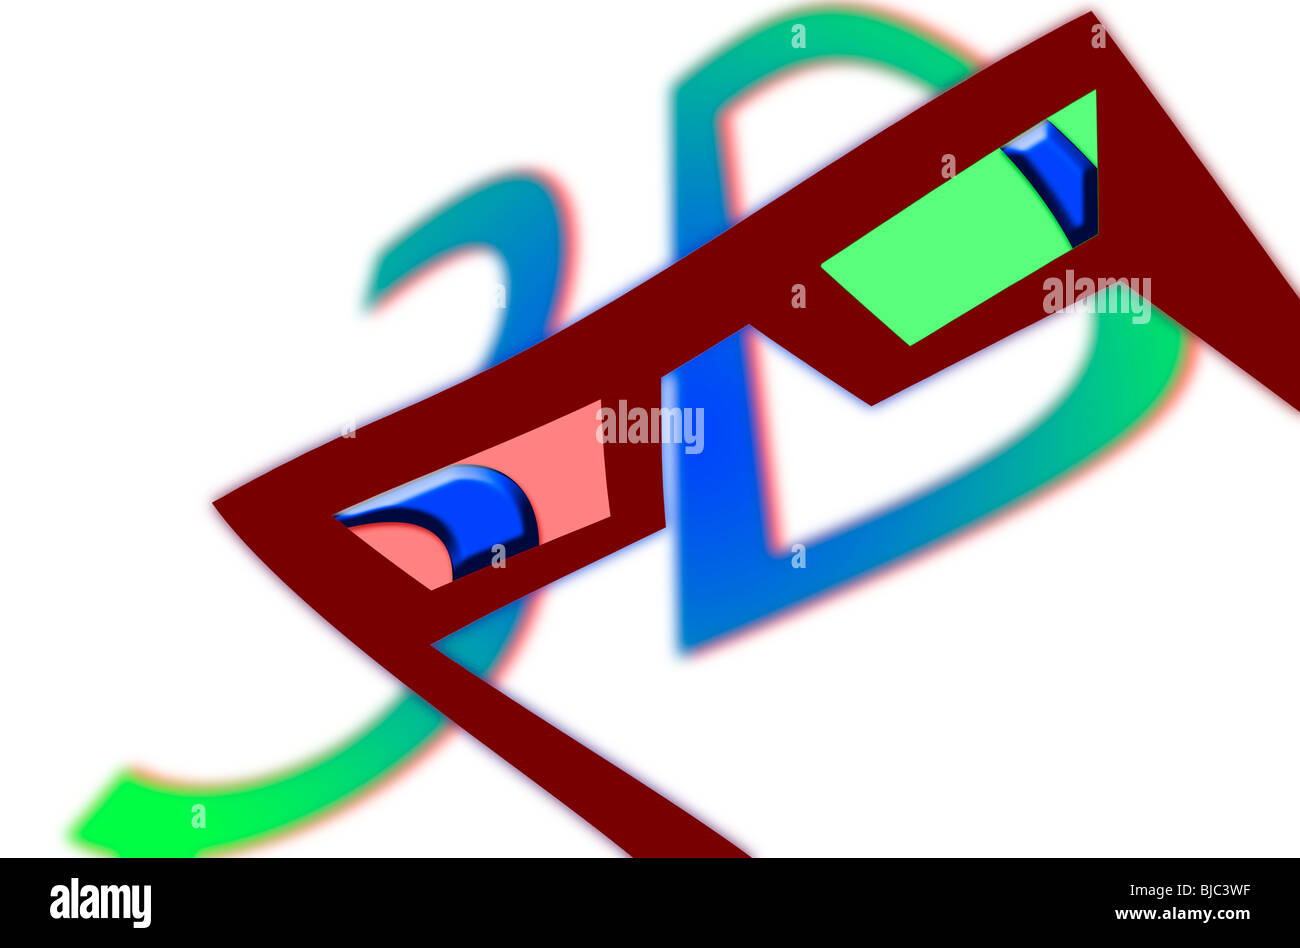 Illustration of 3d concept- view through 3d glasses Stock Photo